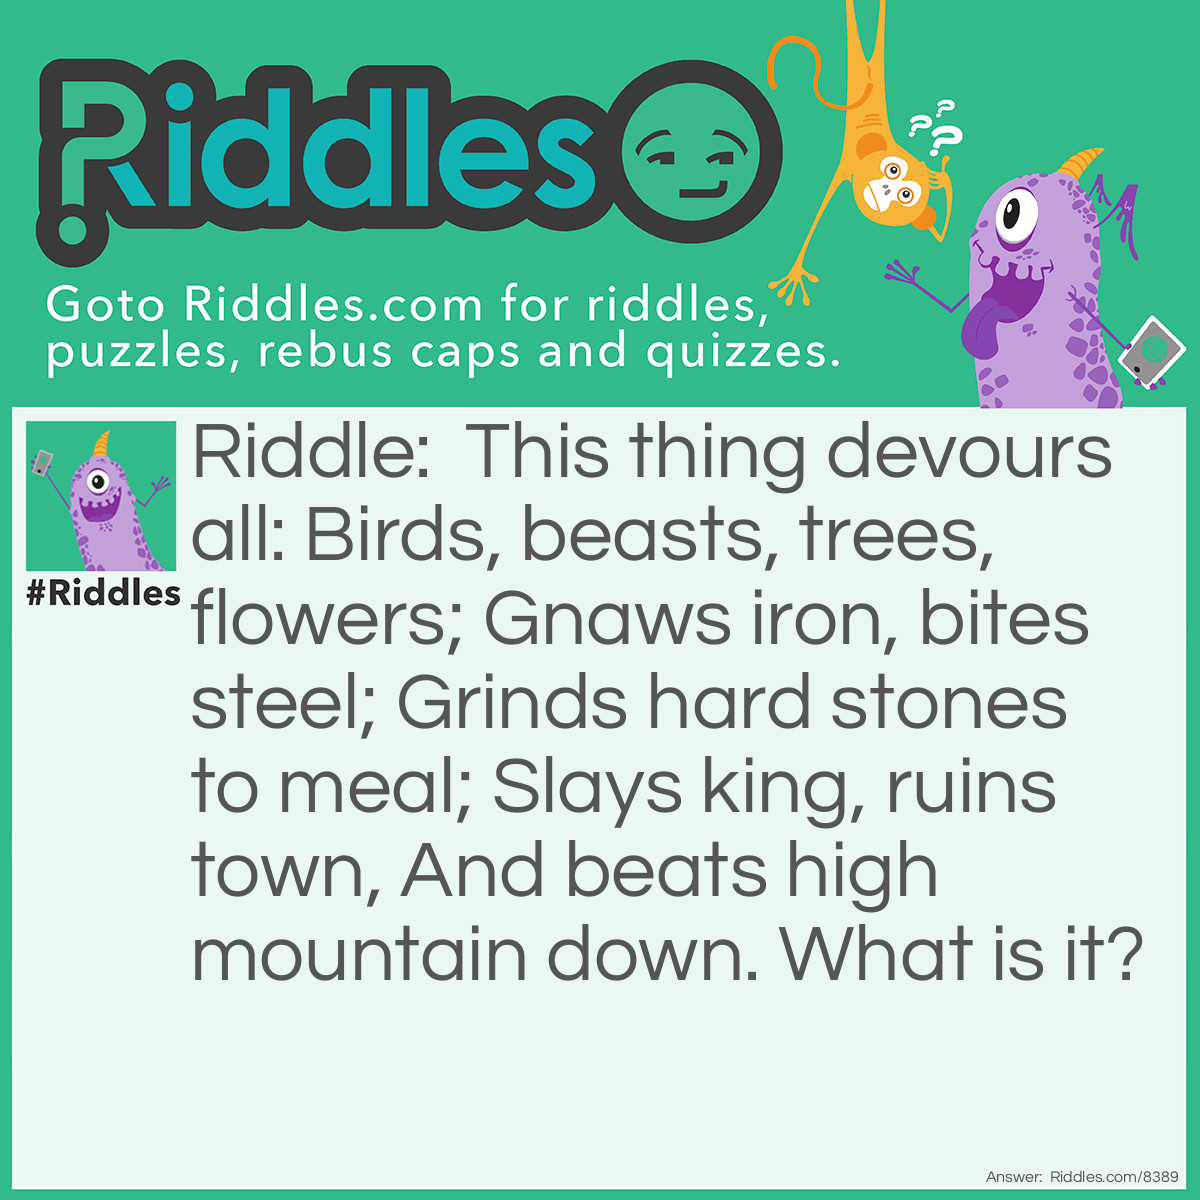 Riddle: This thing devours all: Birds, beasts, trees, flowers; Gnaws iron, bites steel; Grinds hard stones to meal; Slays king, ruins town, And beats high mountain down. What is it? Answer: It's TIME. Don't waste it!